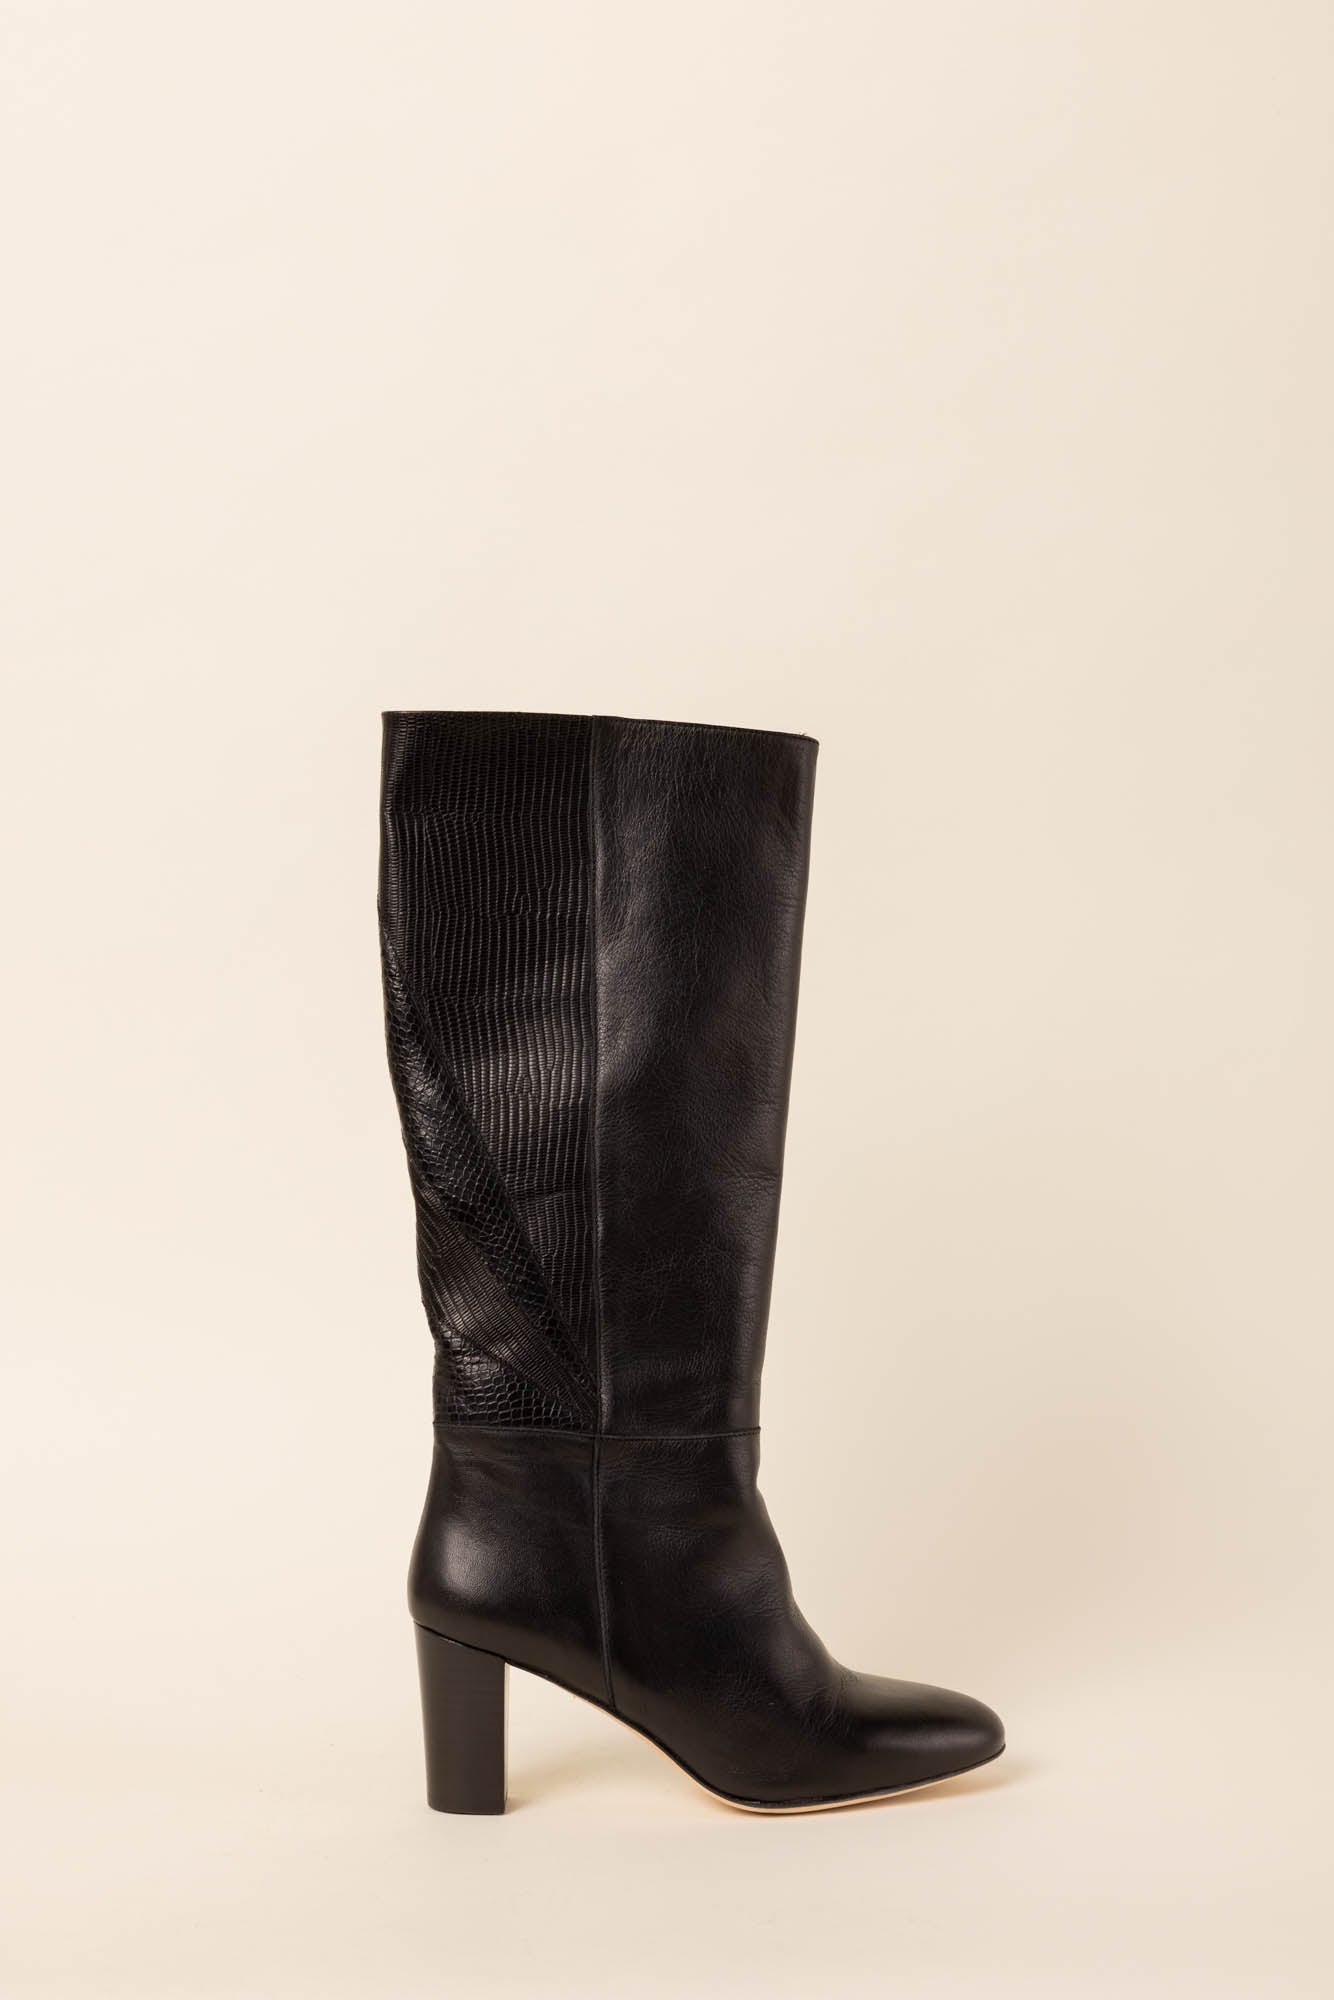 Pirouette boots black